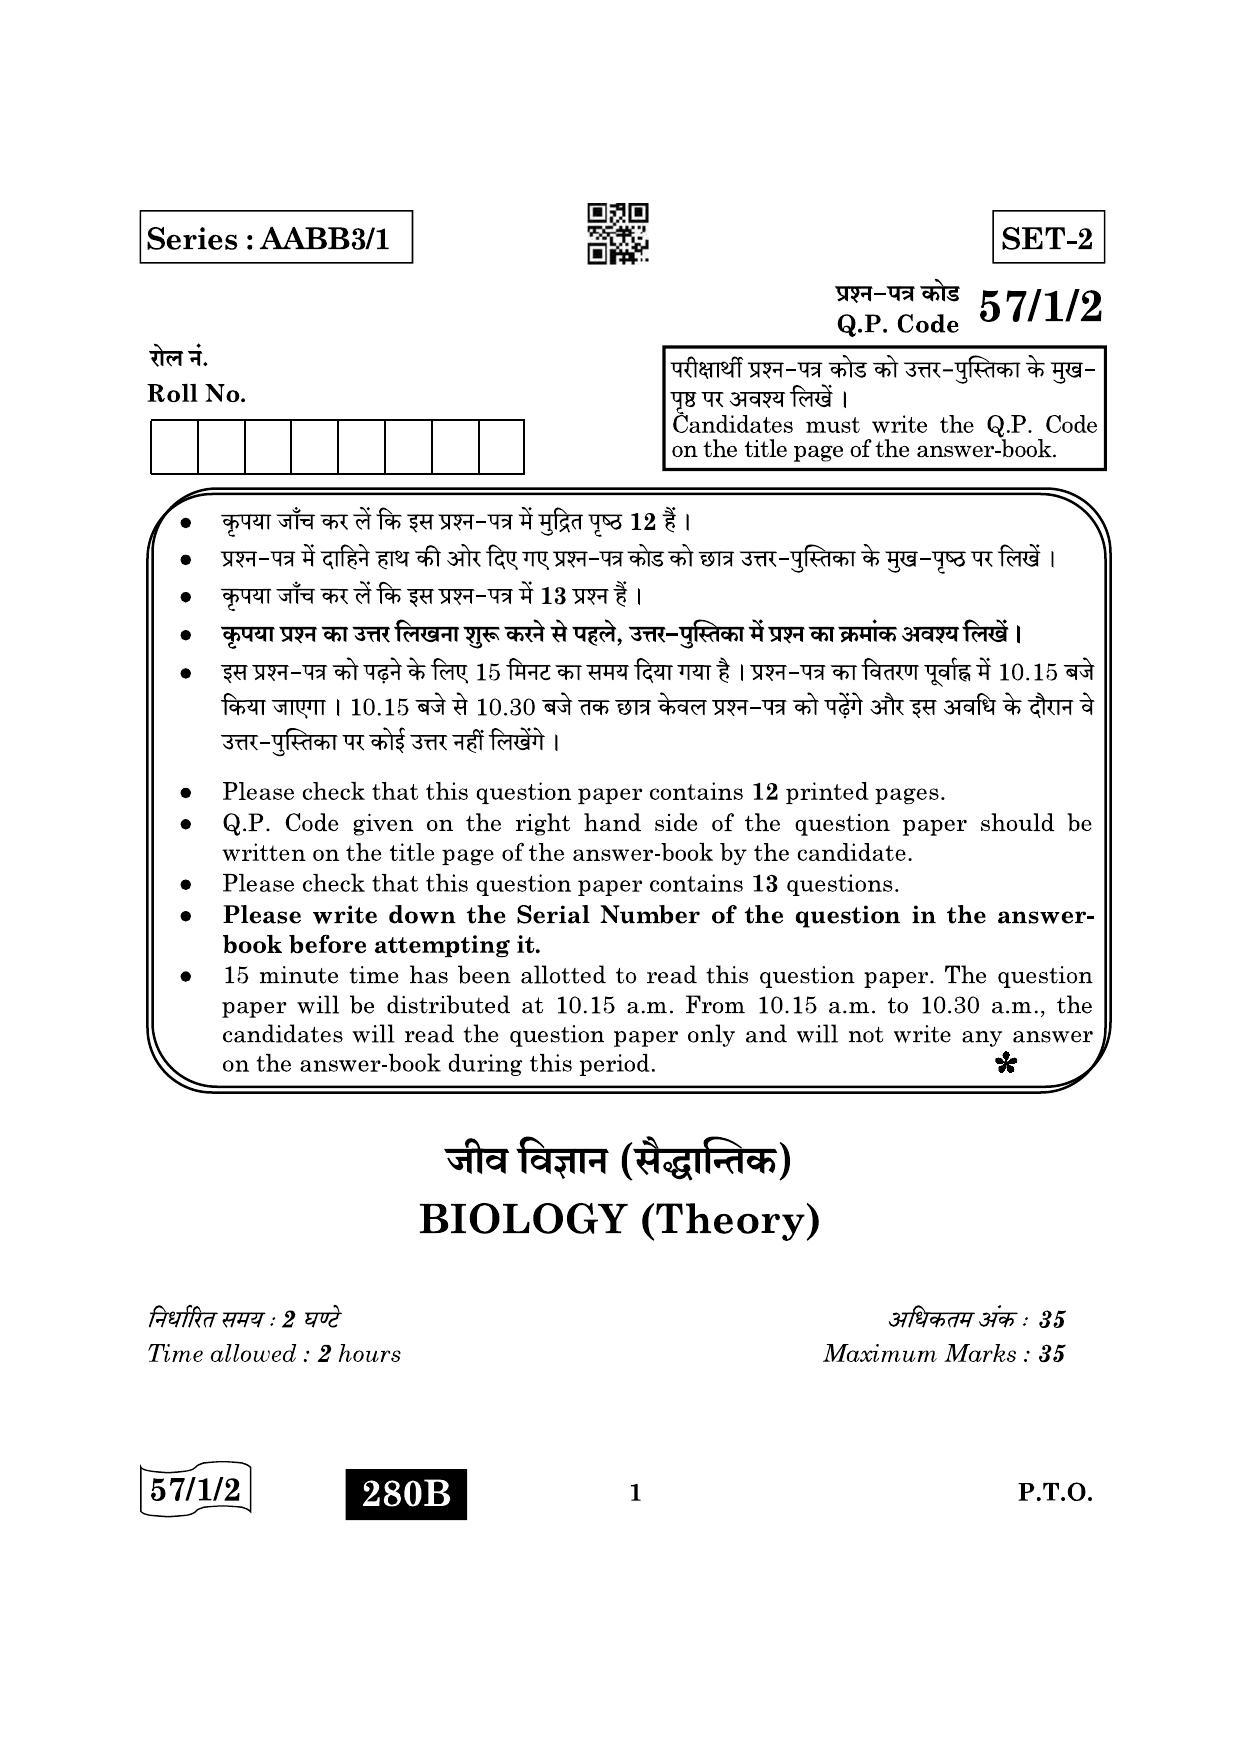 CBSE Class 12 57-1-2 Biology 2022 Question Paper - Page 1